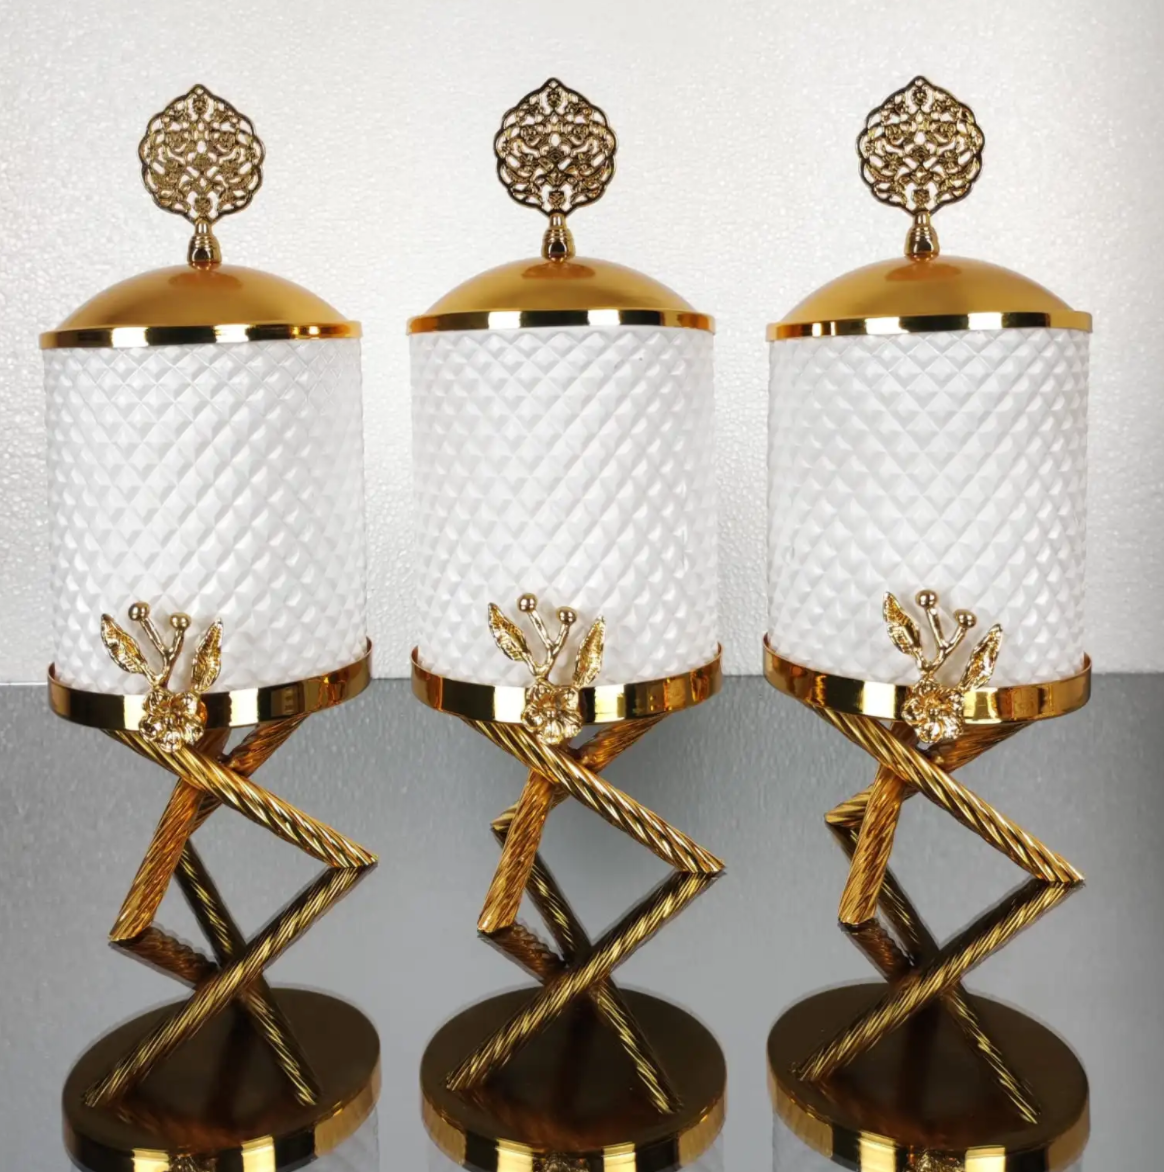 Gold and White Floral Hammered Canister Set With Stand (3 Pieces)